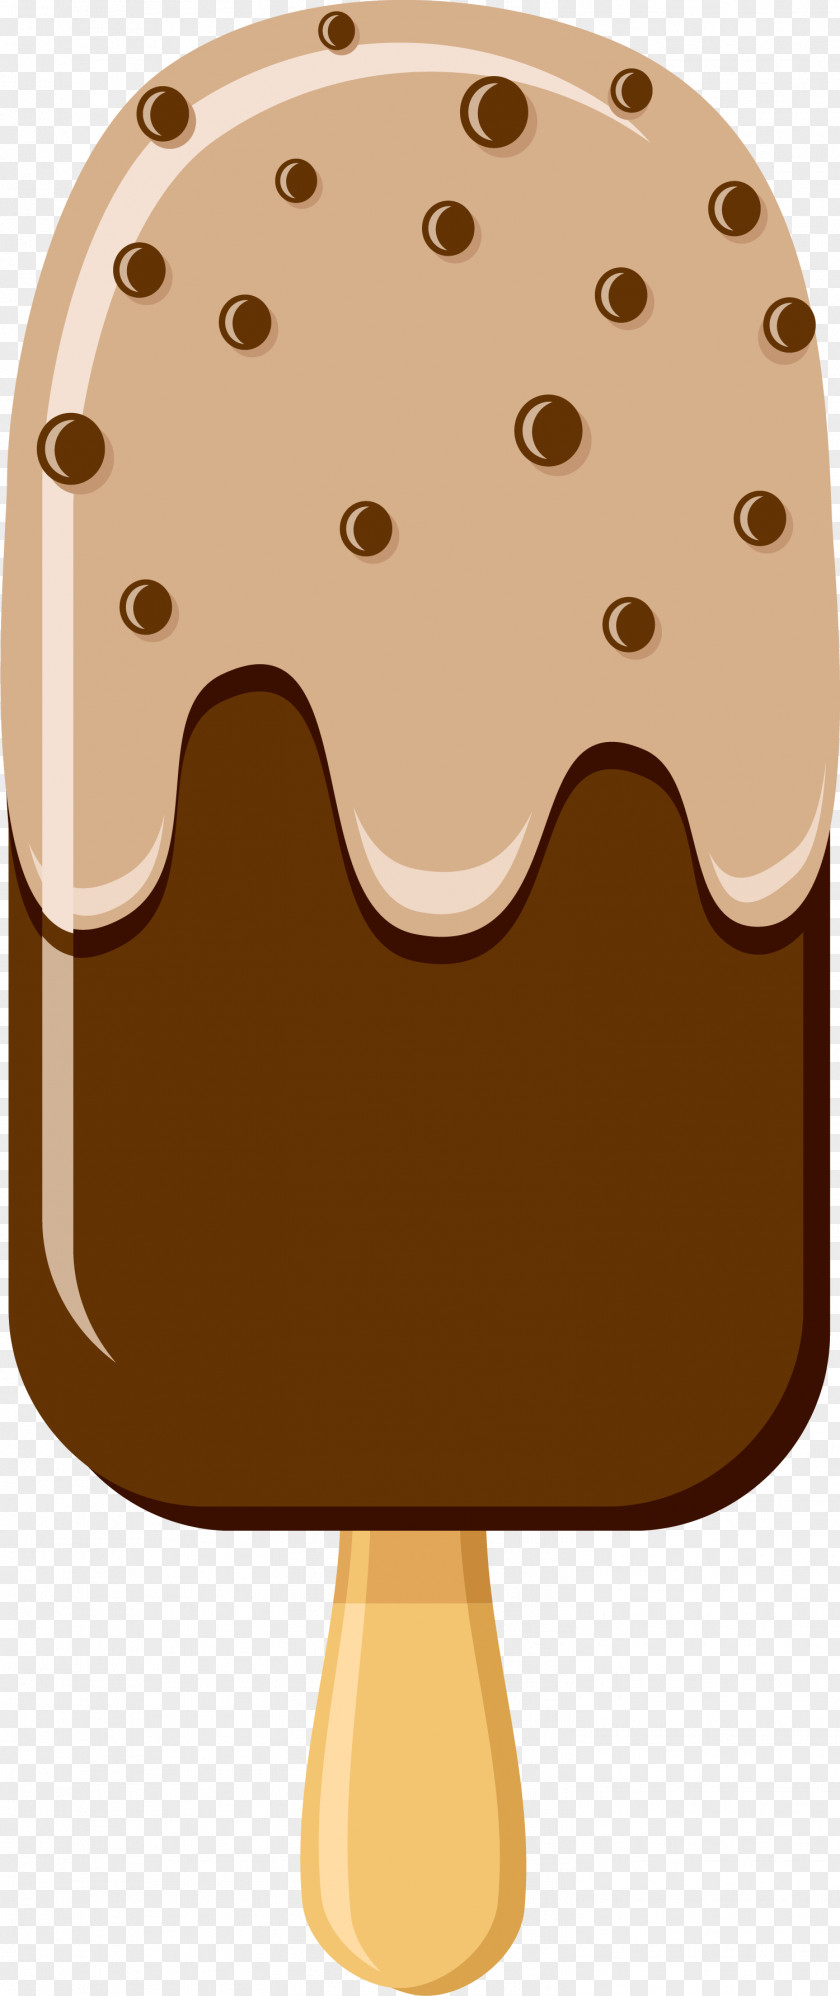 Chocolate Popsicle Material Ice Cream Pop Clip Art PNG